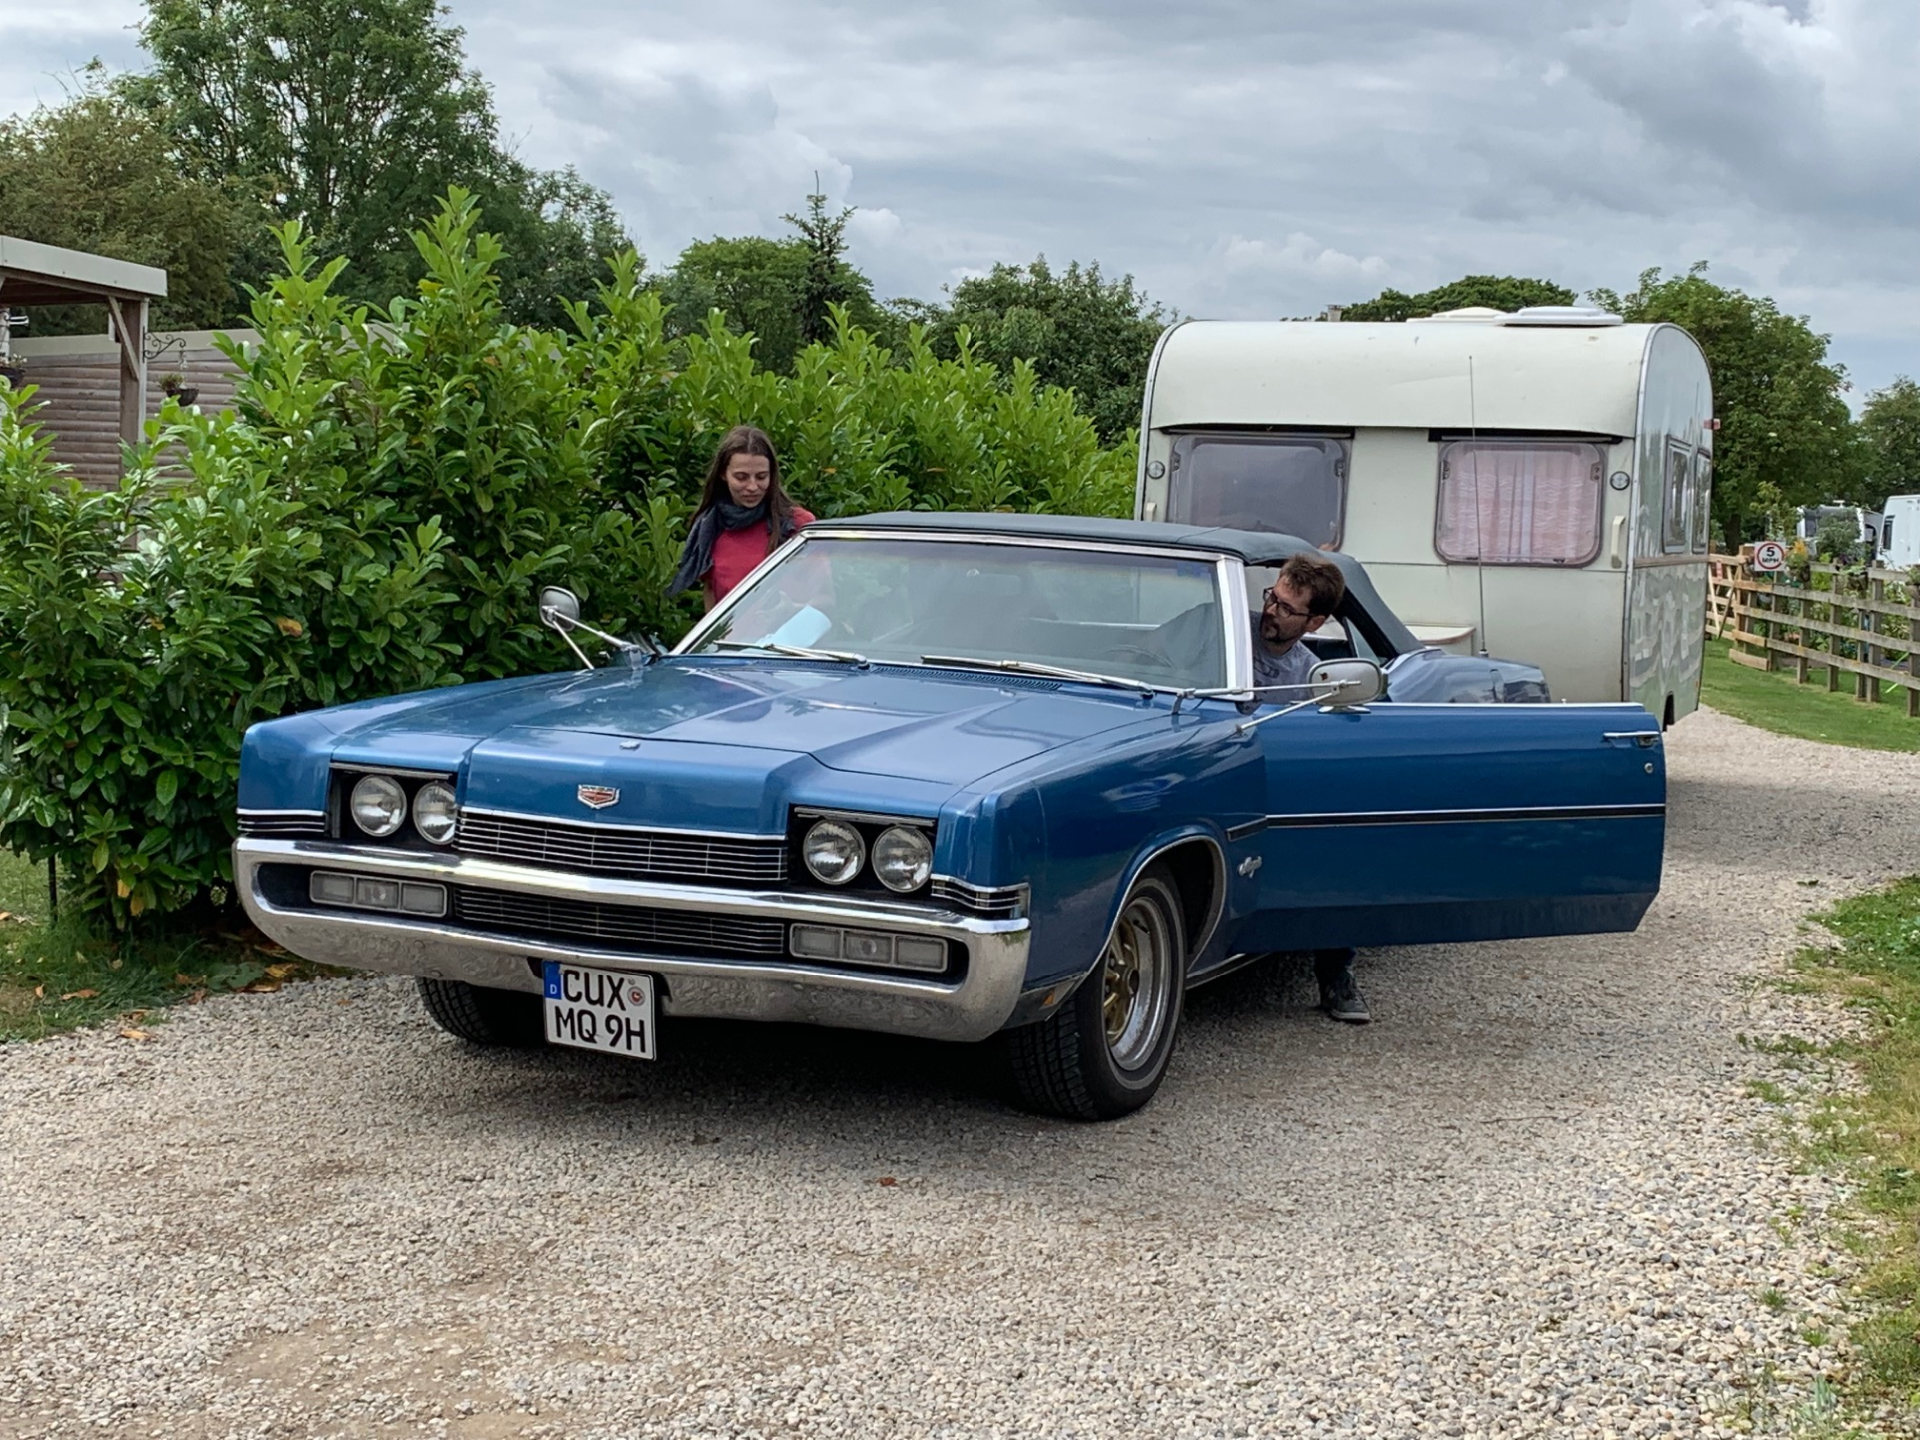 Young couple with a Classic, blue american car pulling a white caravan.